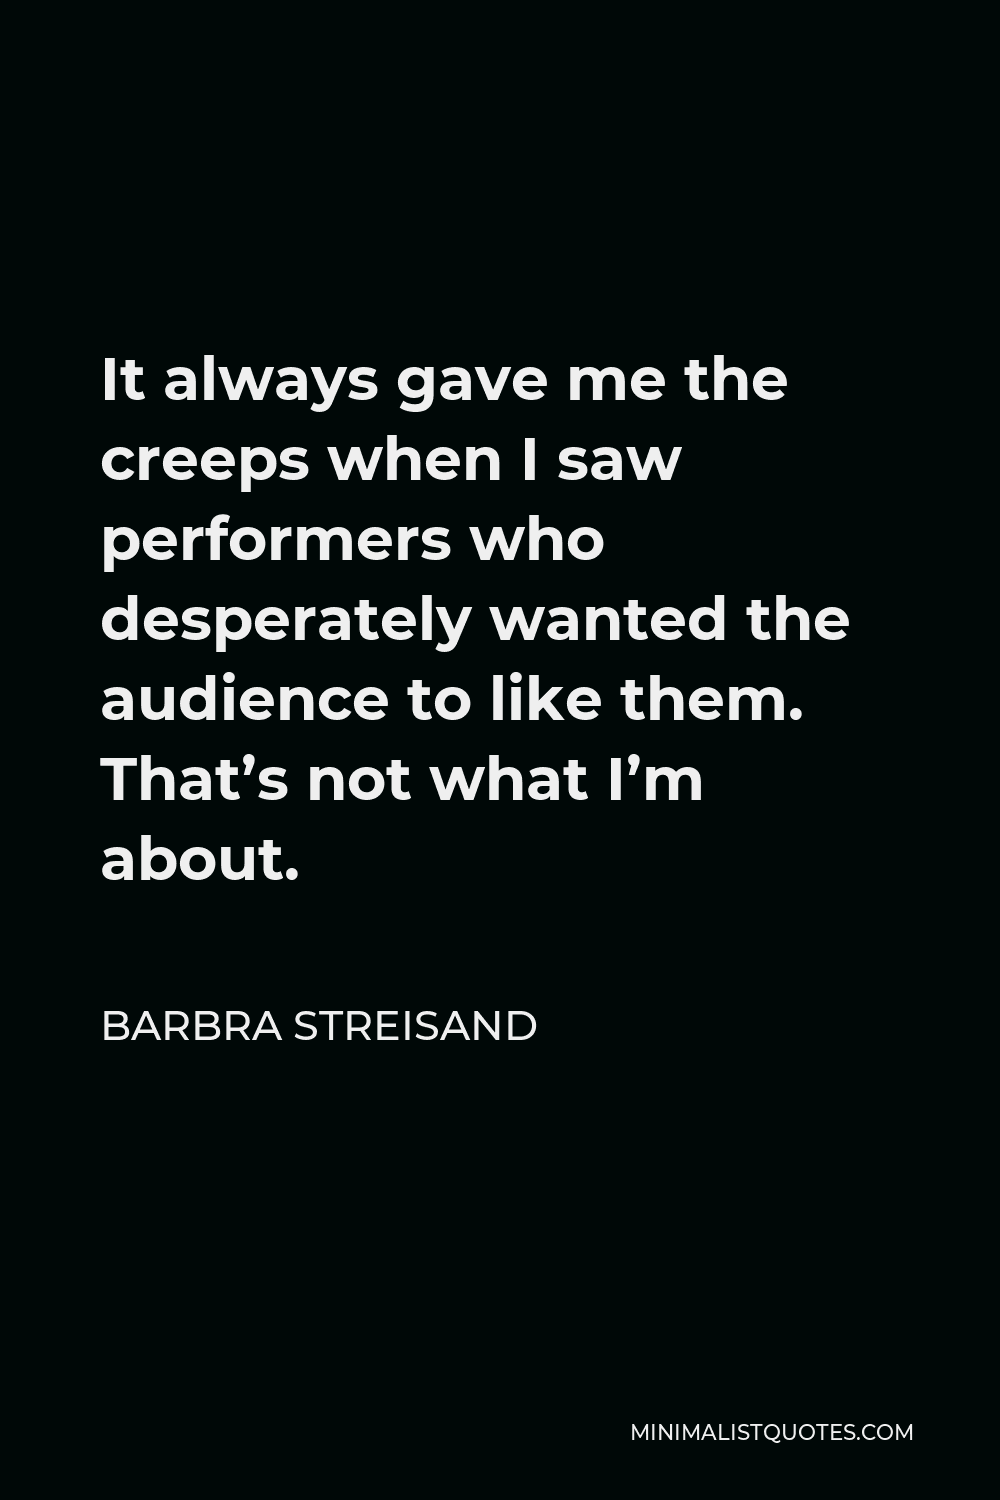 Barbra Streisand Quote - It always gave me the creeps when I saw performers who desperately wanted the audience to like them. That’s not what I’m about.